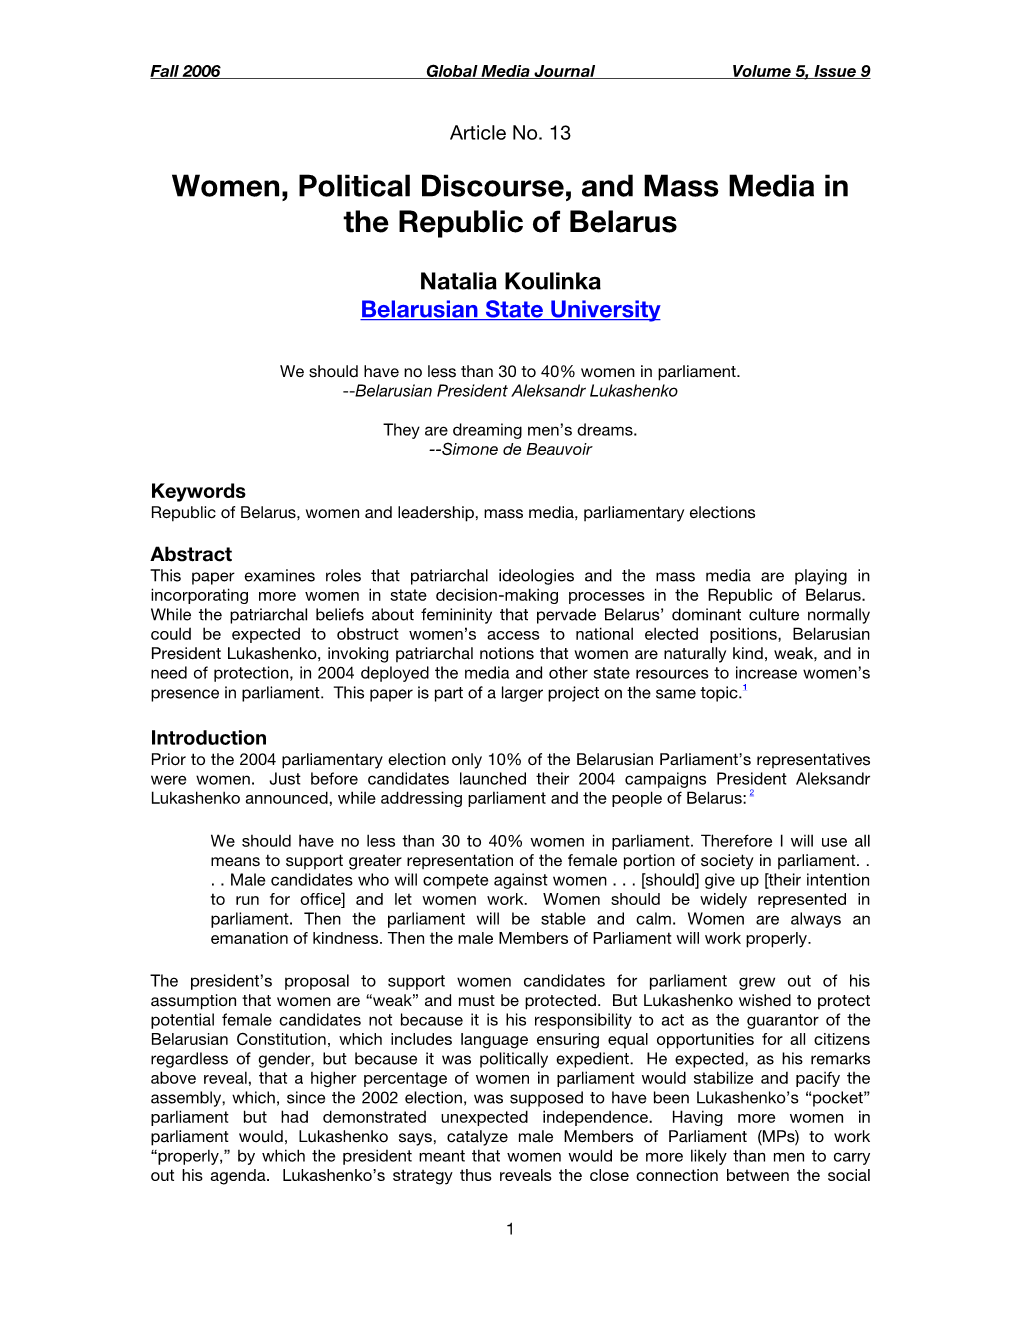 Women, Political Discourse, and Mass Media in the Republic of Belarus